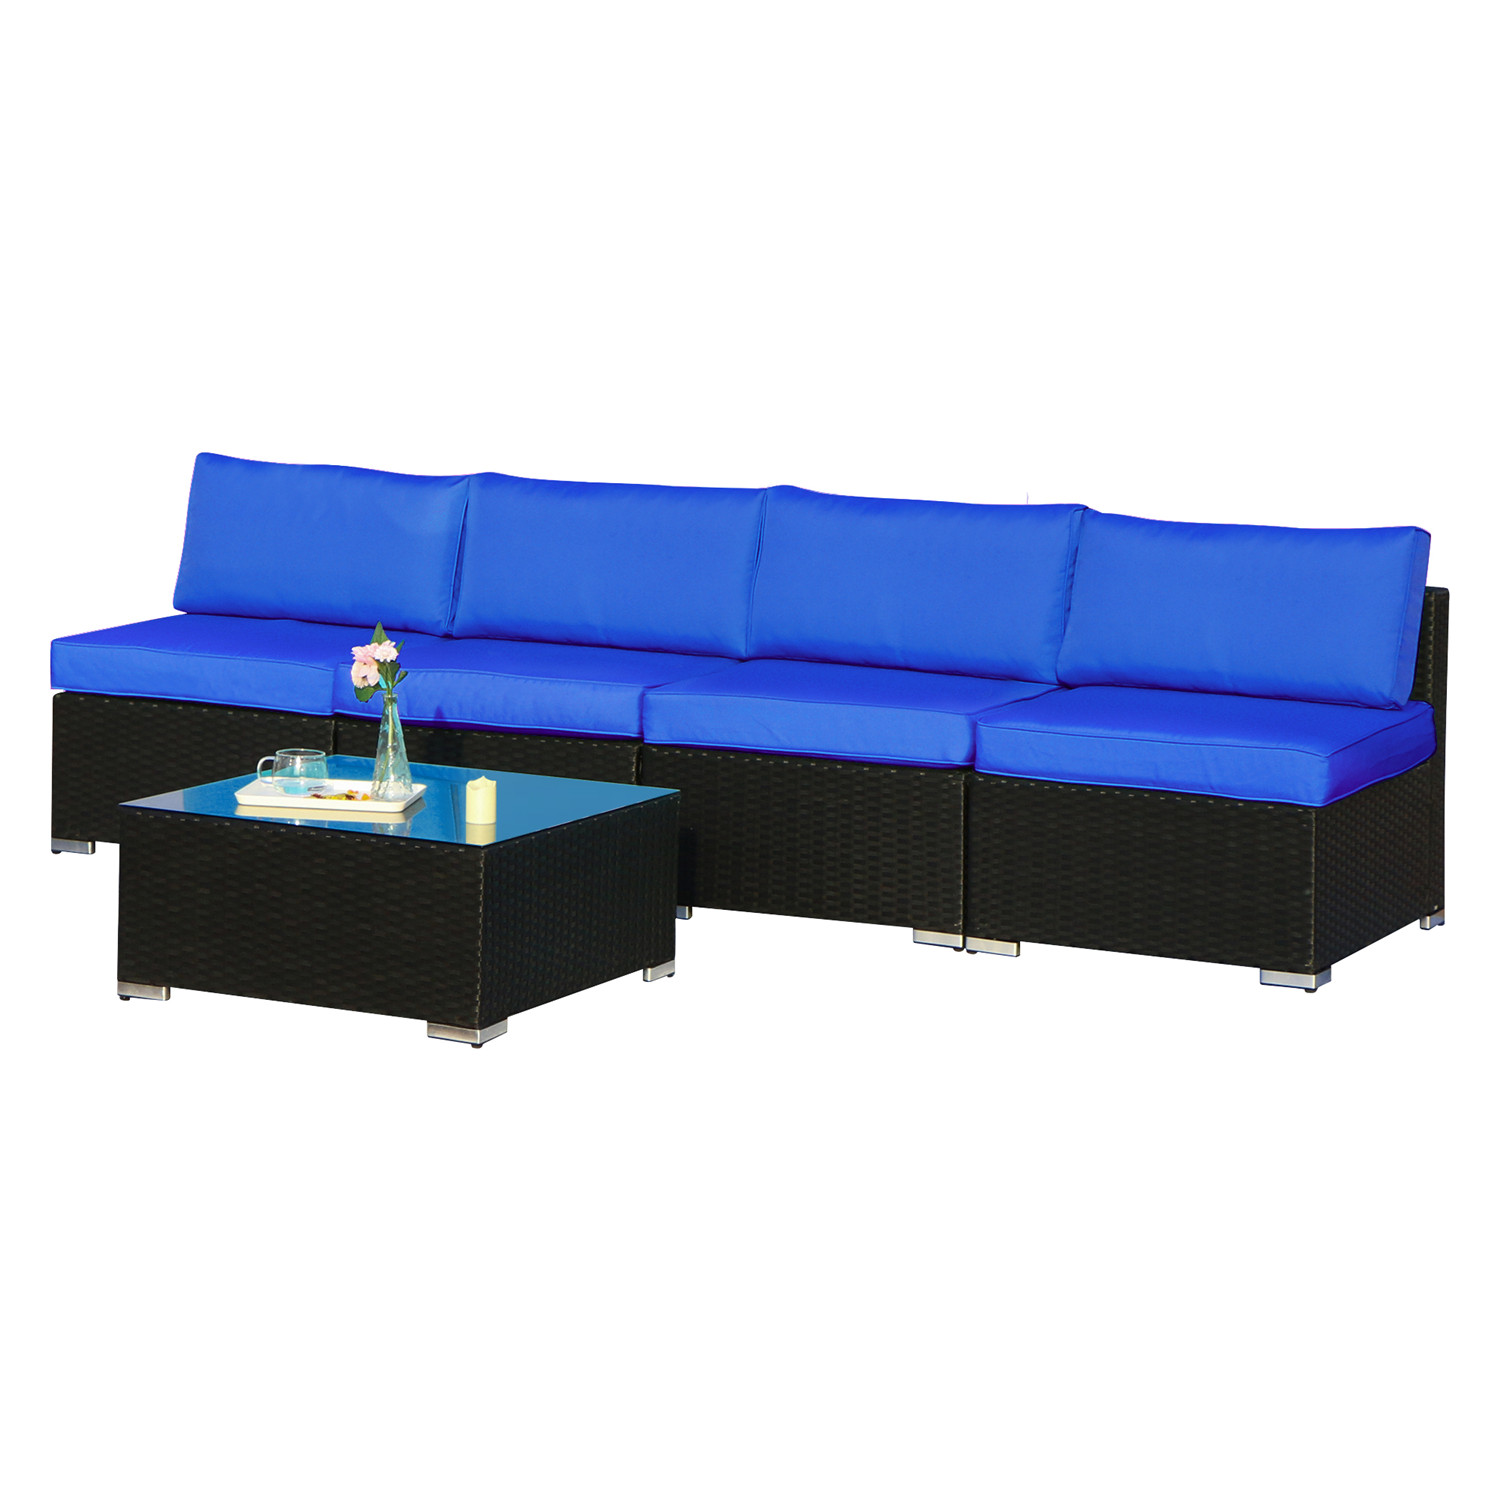 Cozyhom 5 Piece Patio Furniture Sets, All-Weather PE Wicker Rattan Outdoor Sectional Sofa with Coffee Table & Washable Couch Cushions, Royal Blue - image 1 of 5